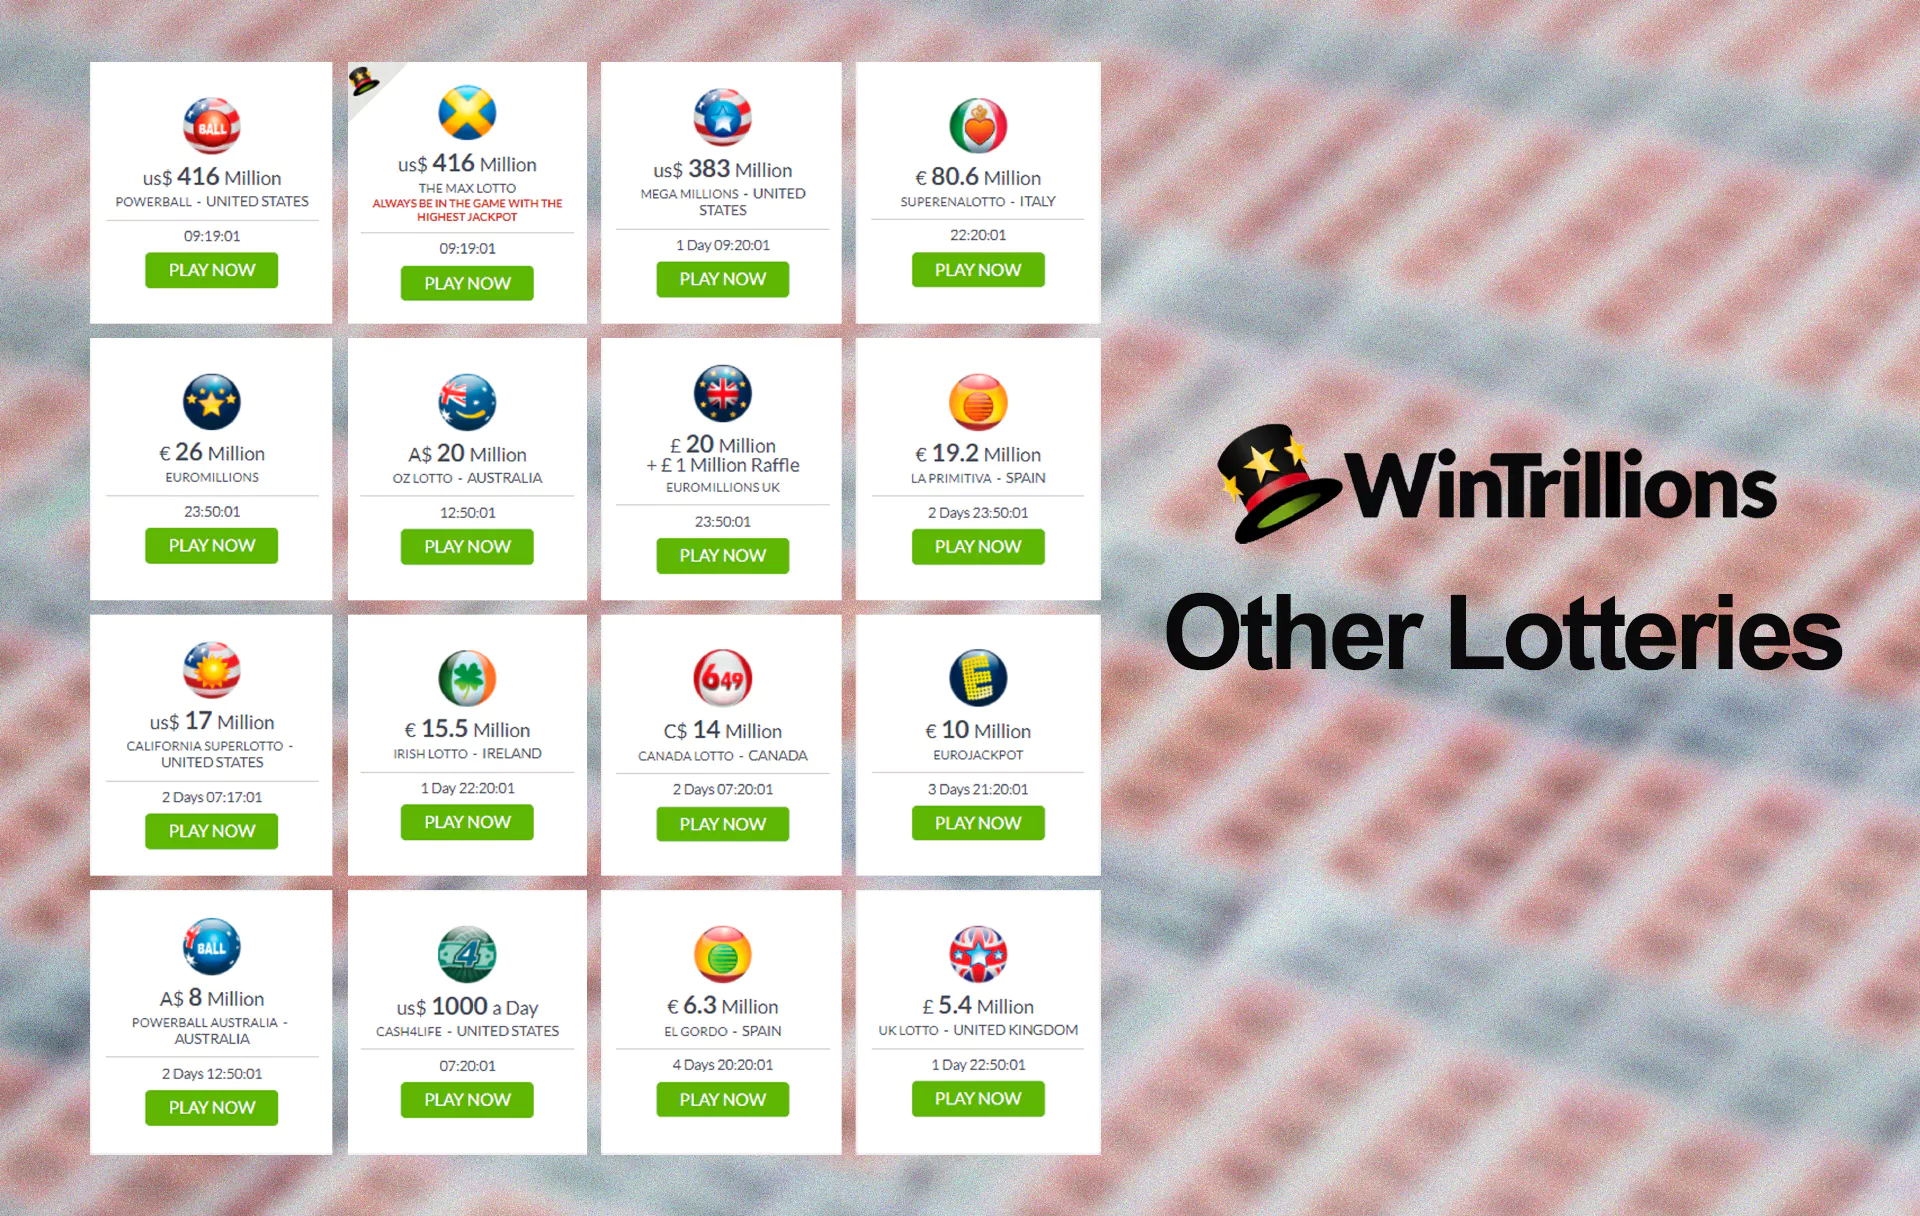 Also on the site of WinTrillions, you can find a list of other lotteries.